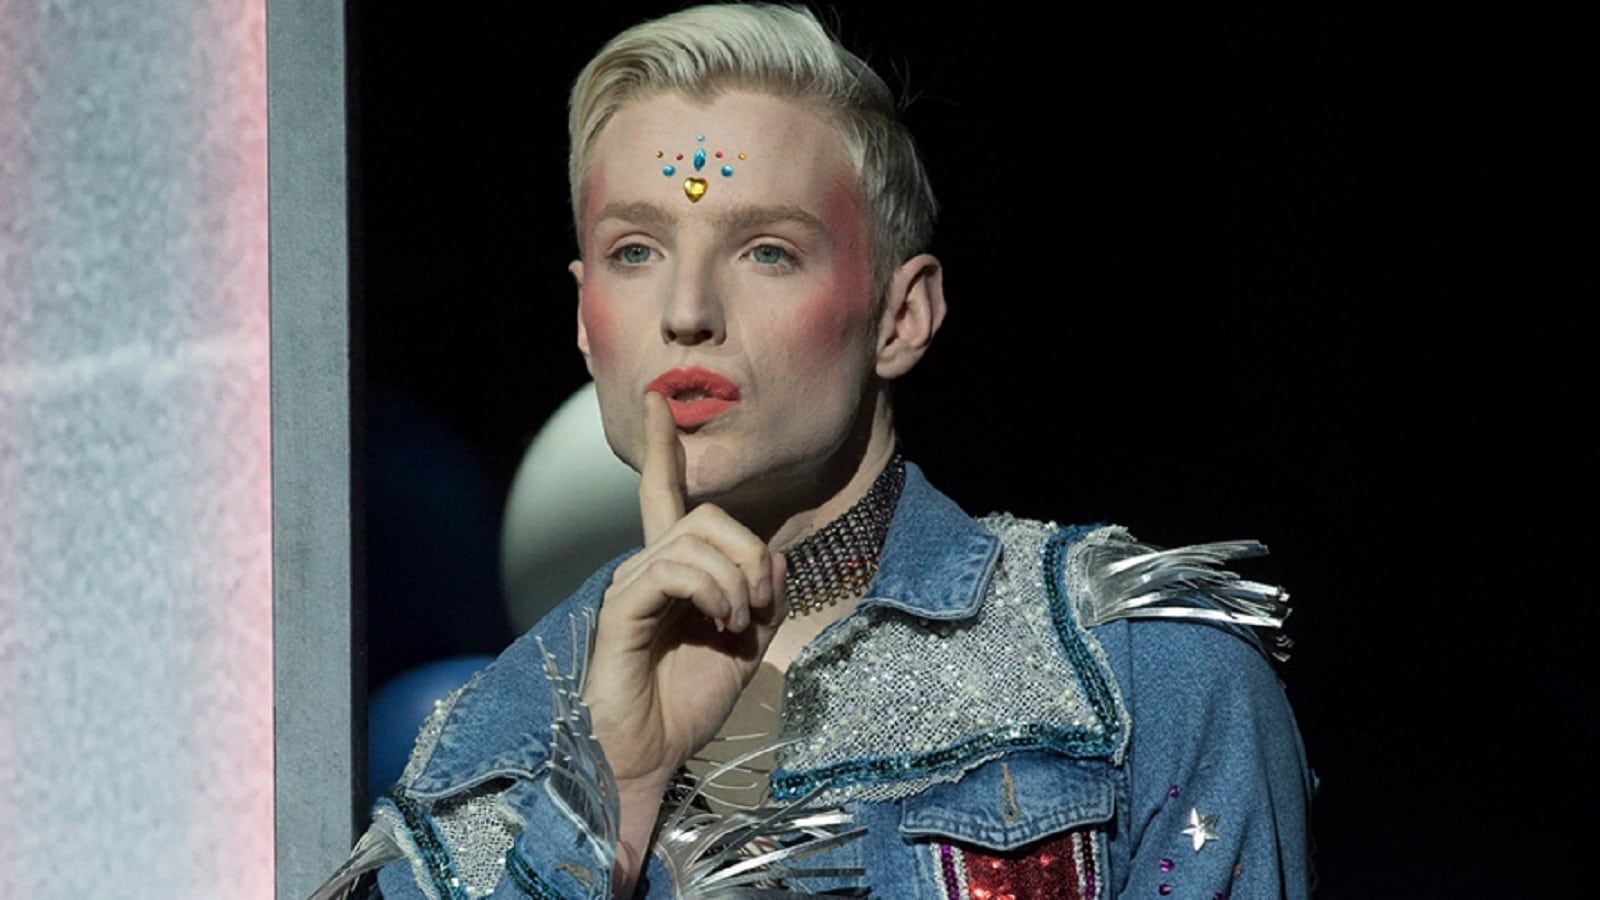 Teen drag queen musical Everybody's Talking About Jamie to get film adaptation